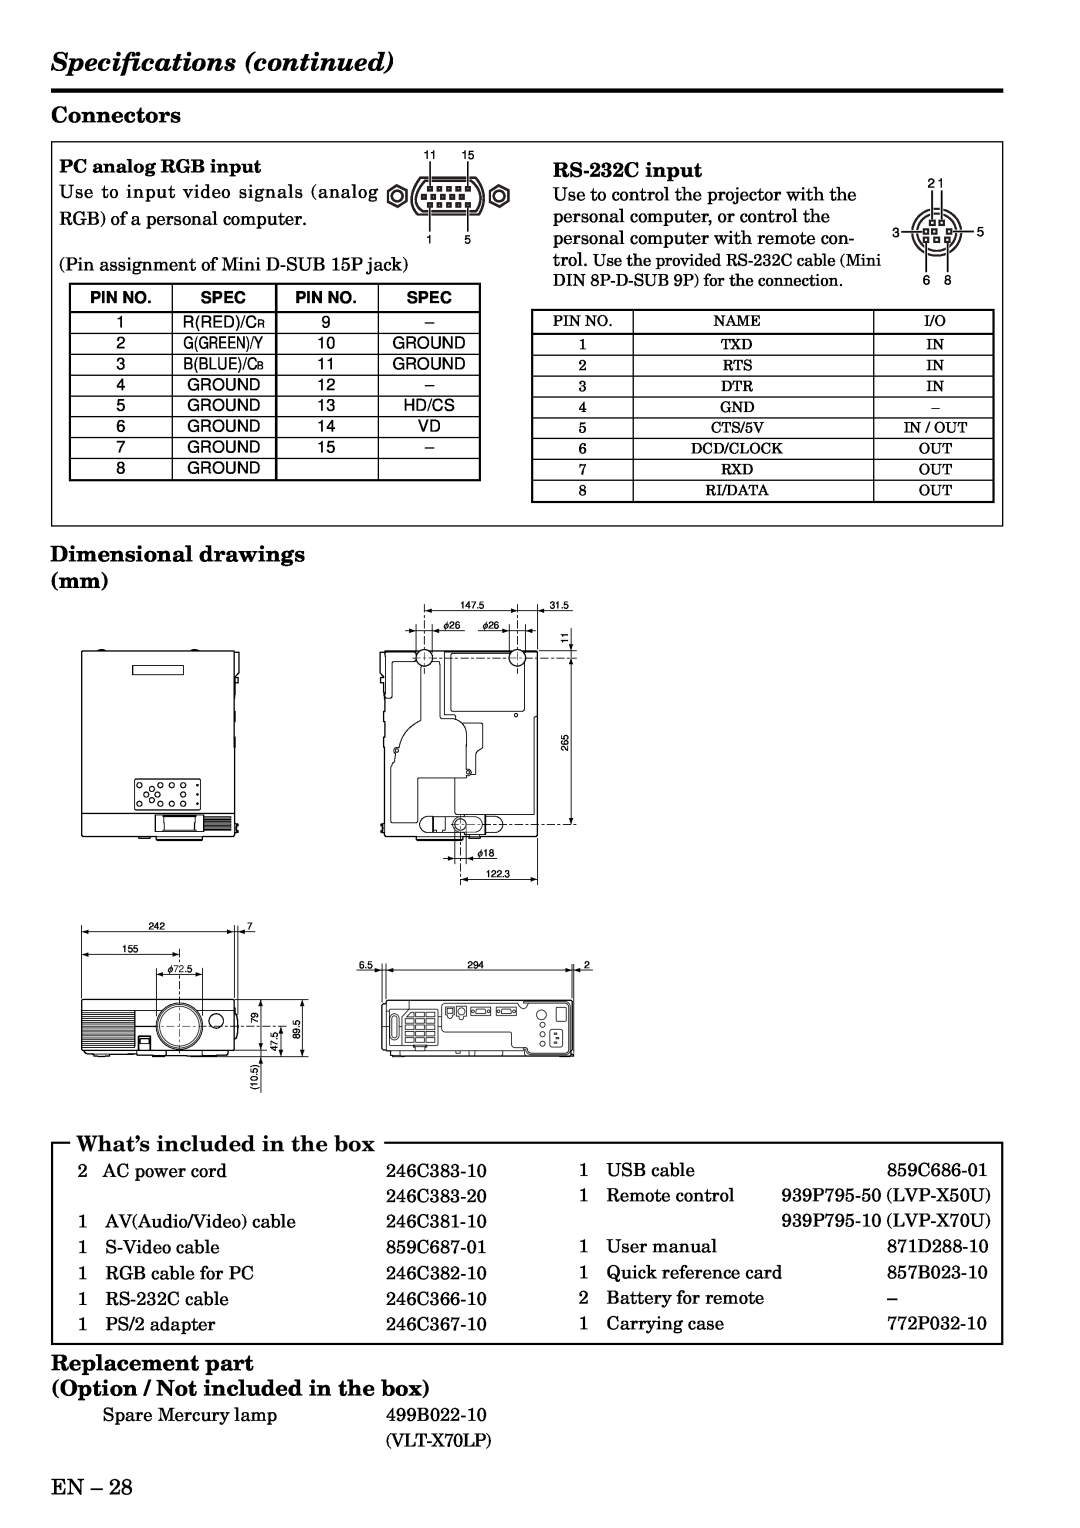 Mitsubishi Electronics X50, X70 Specifications continued, Connectors, Dimensional drawings mm, What’s included in the box 